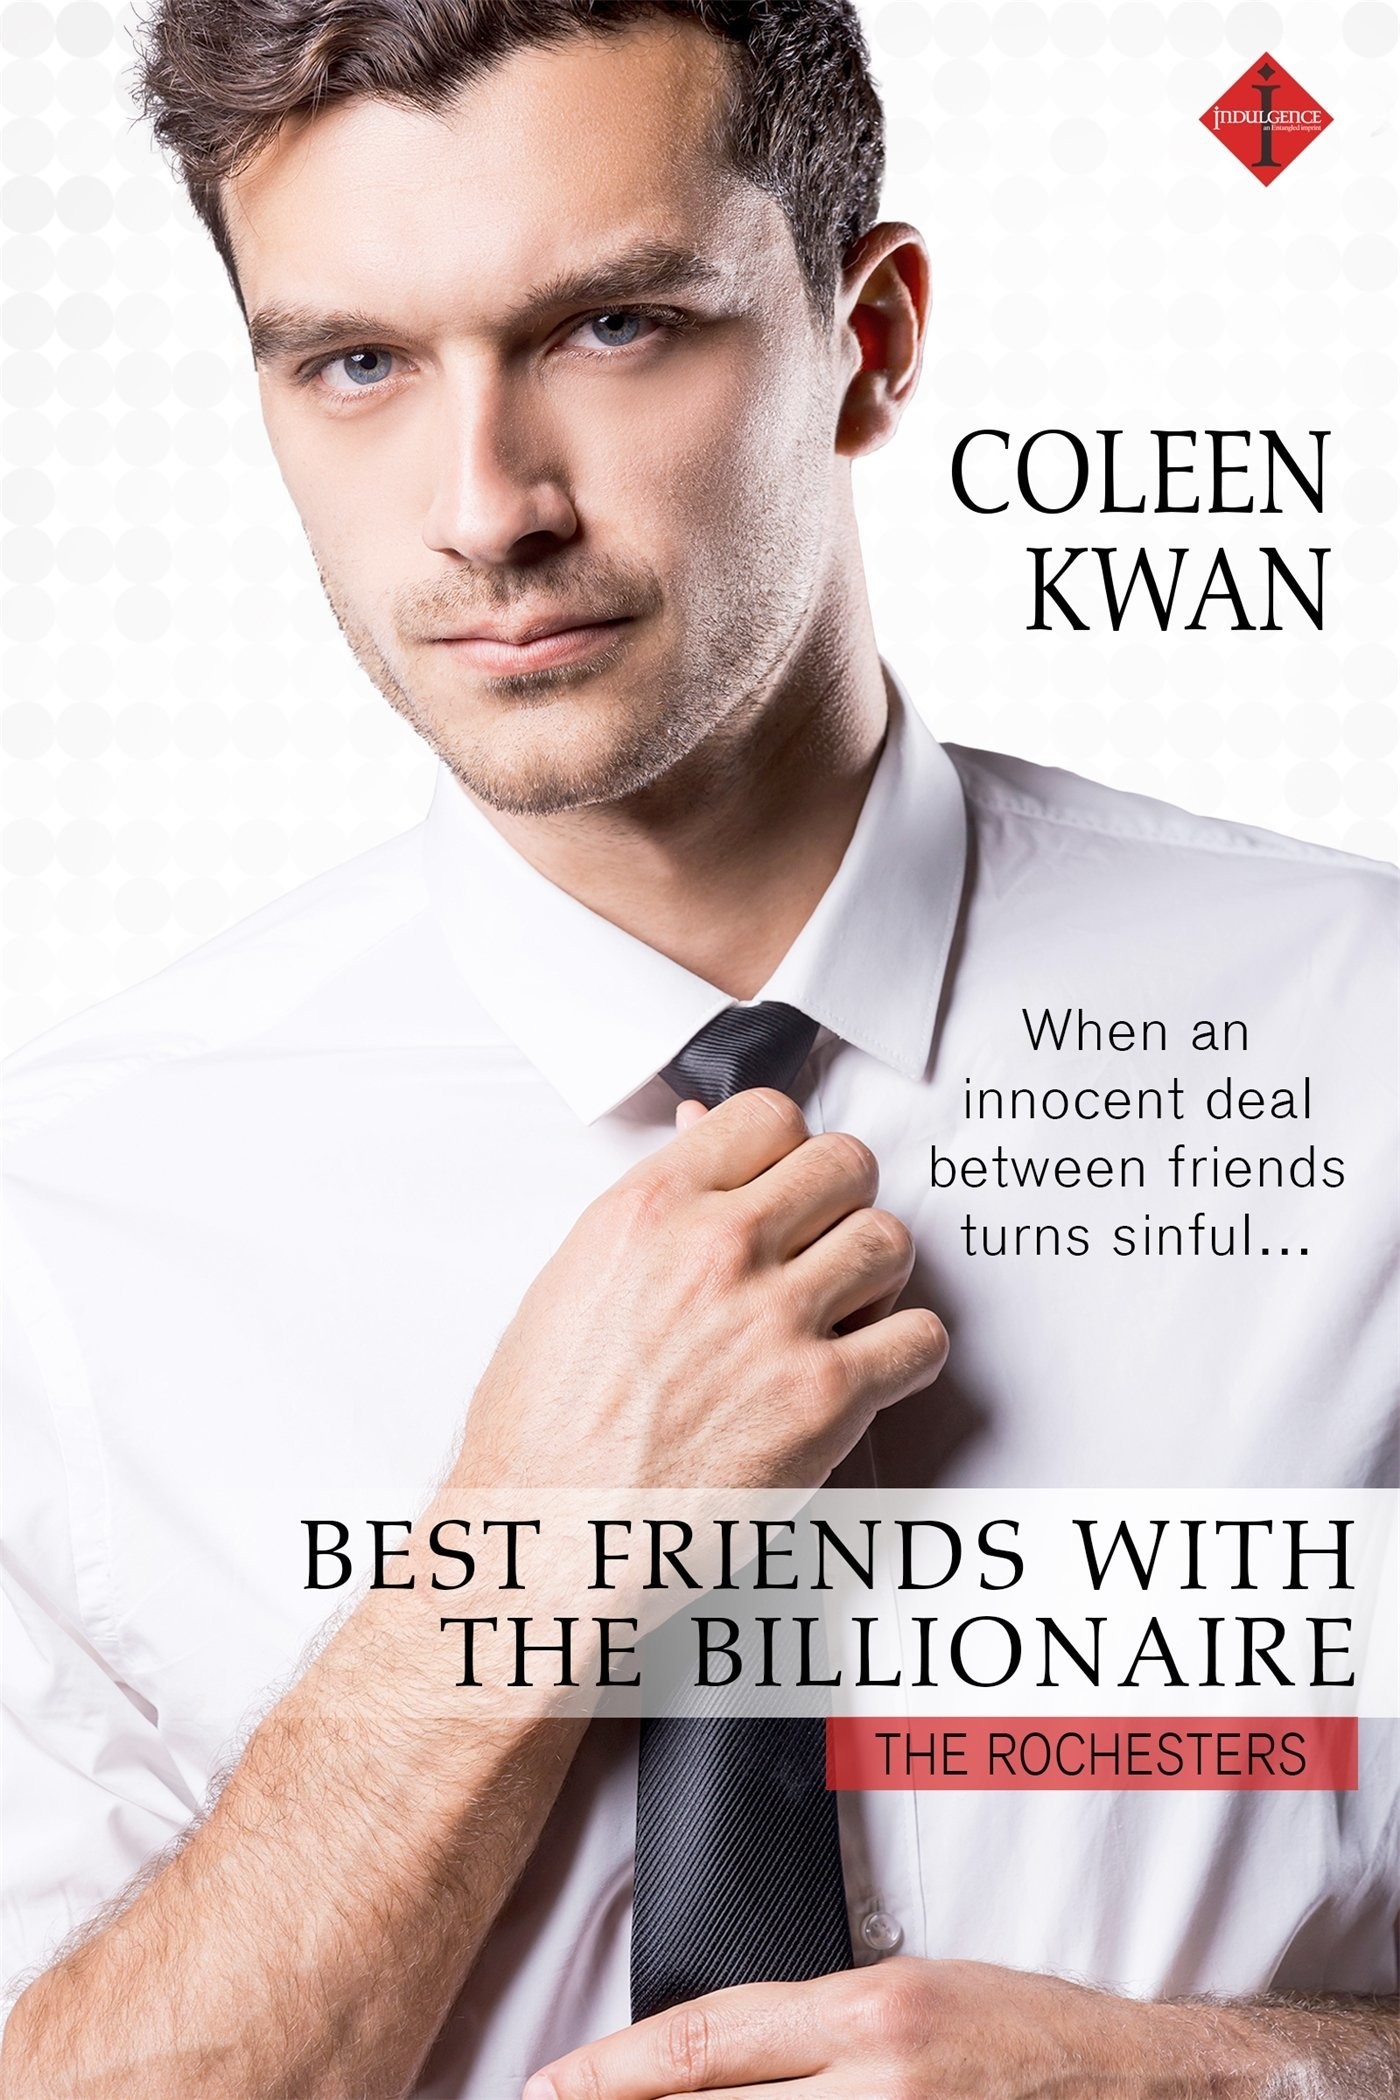 Best Friends With the Billionaire (The Rochesters) by Coleen Kwan